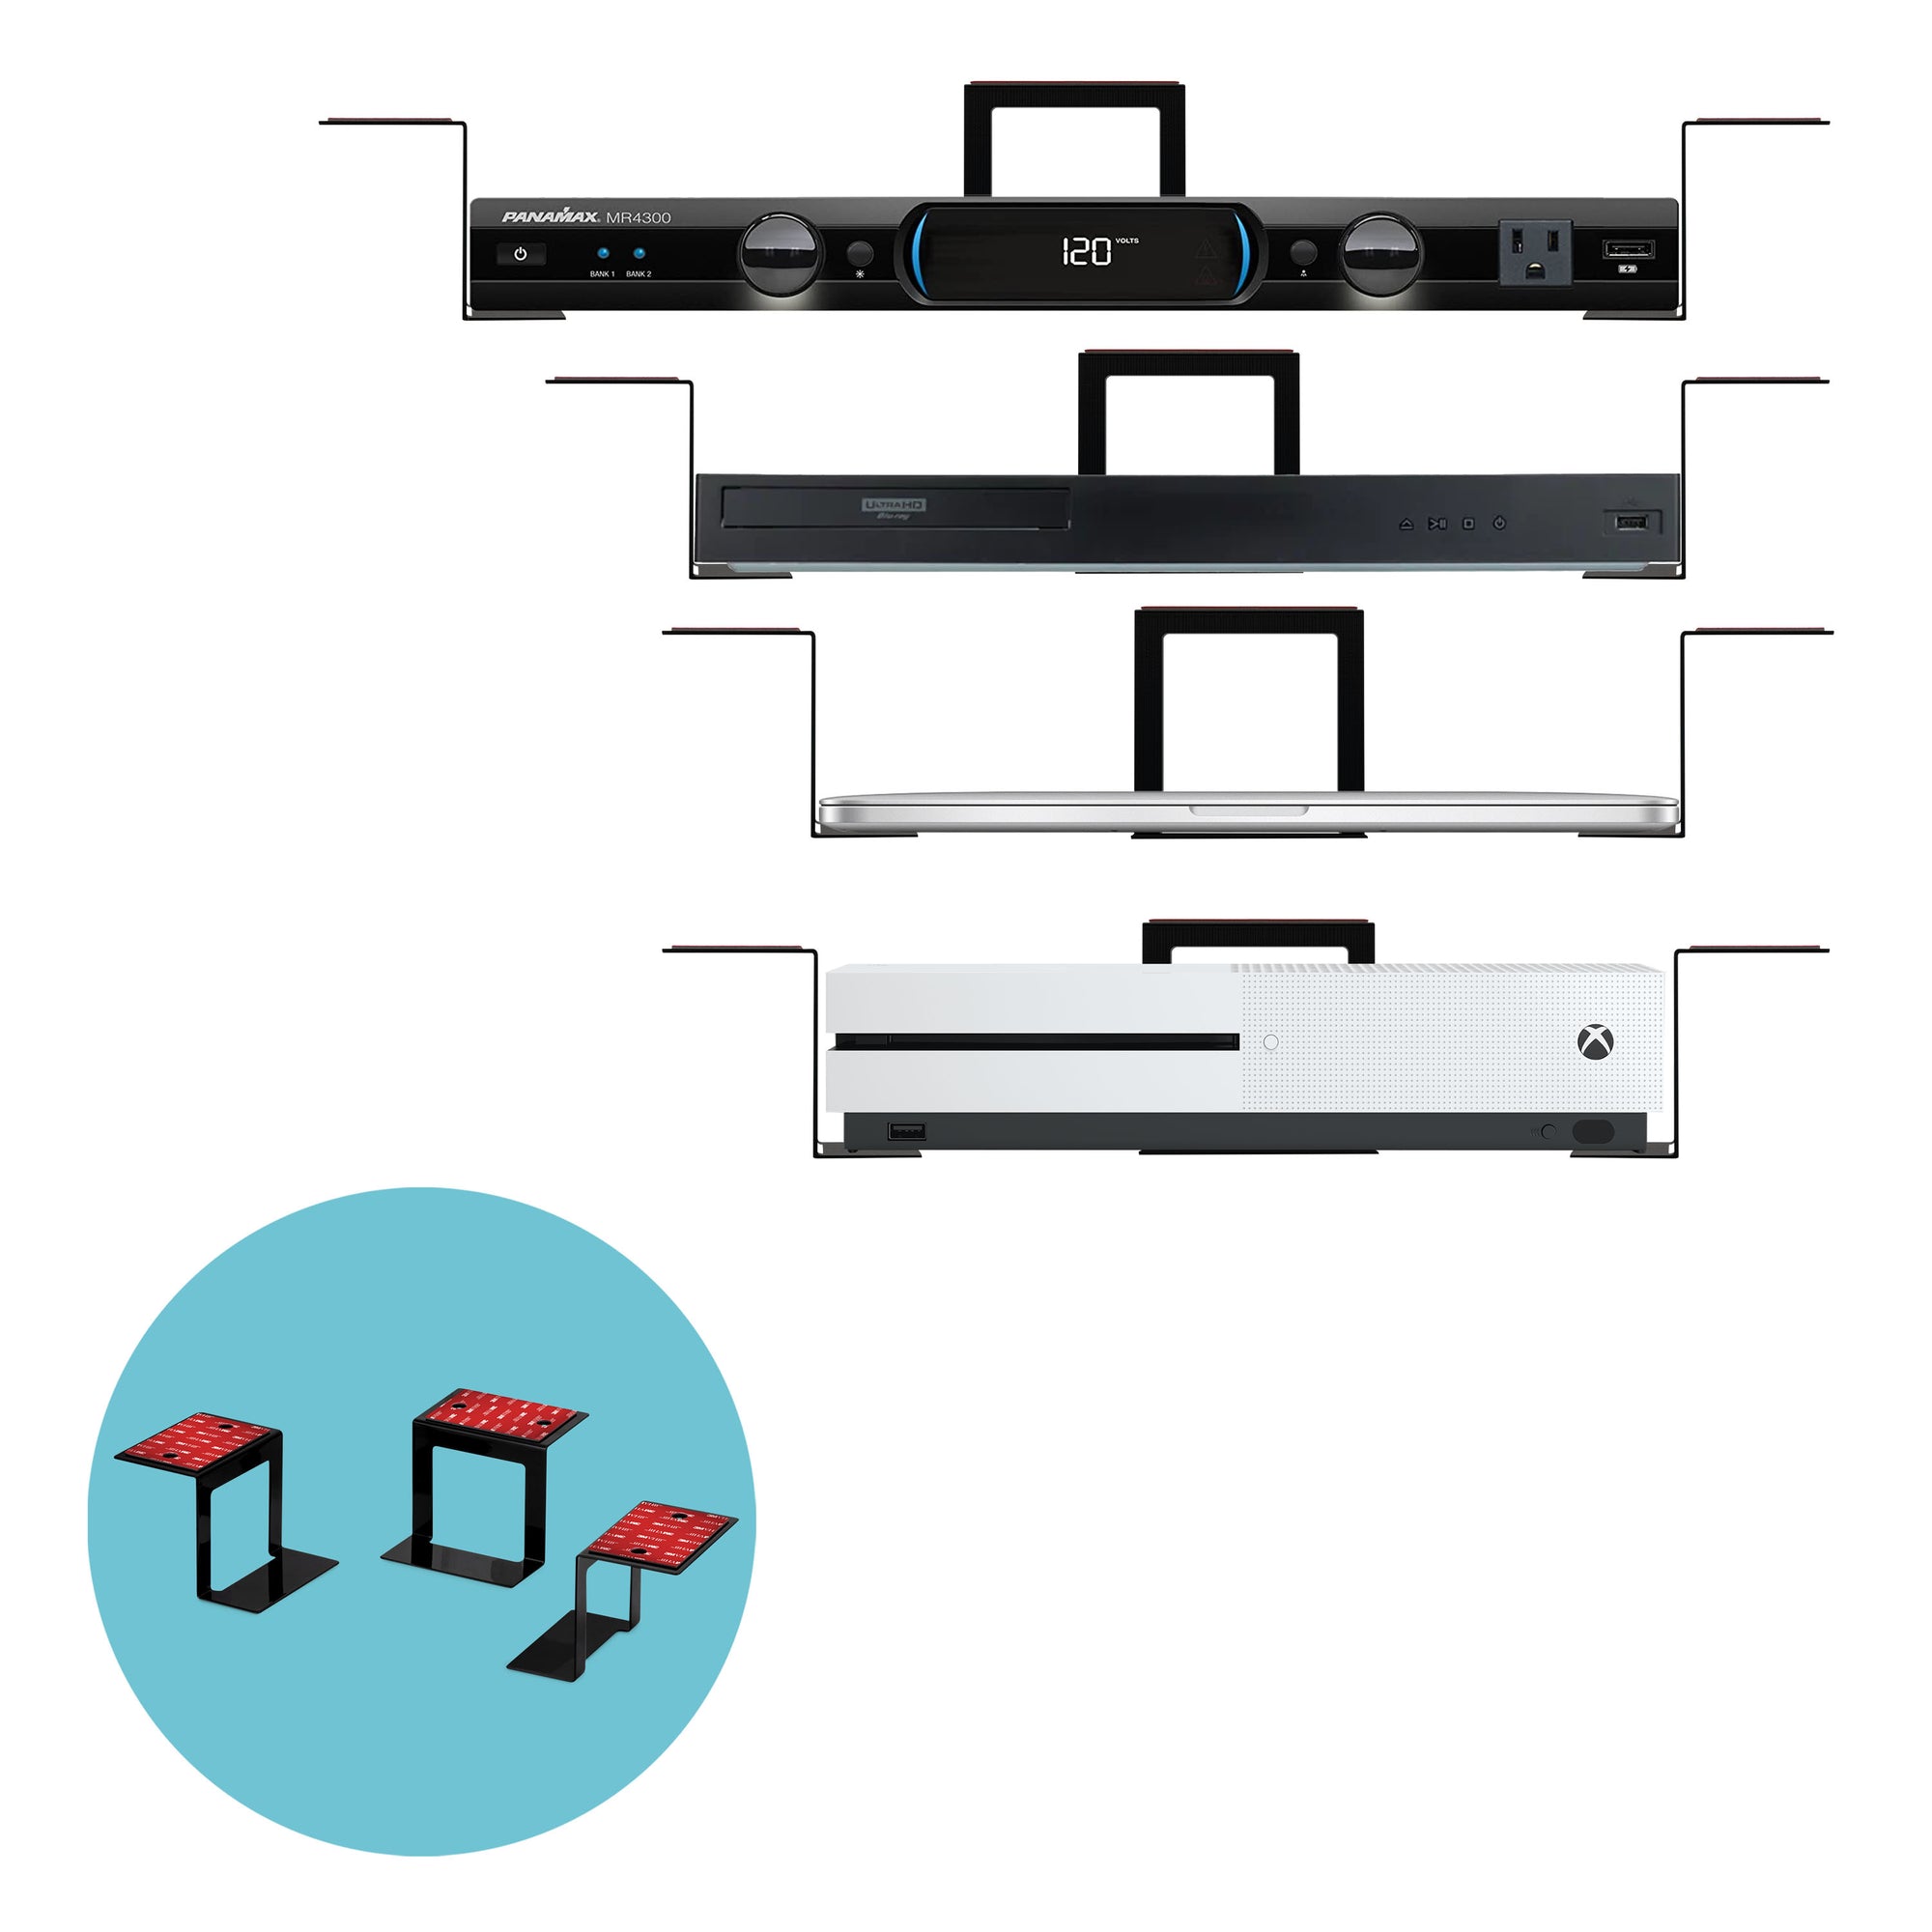 3” Metal Under Desk Laptop, Cable Box & Router Holder Mount, Adhesive & Screw In, Holds upto 3" Devices Like Small Computers, Macbook, Surface, Keyboard, Network Switch, Modems & More